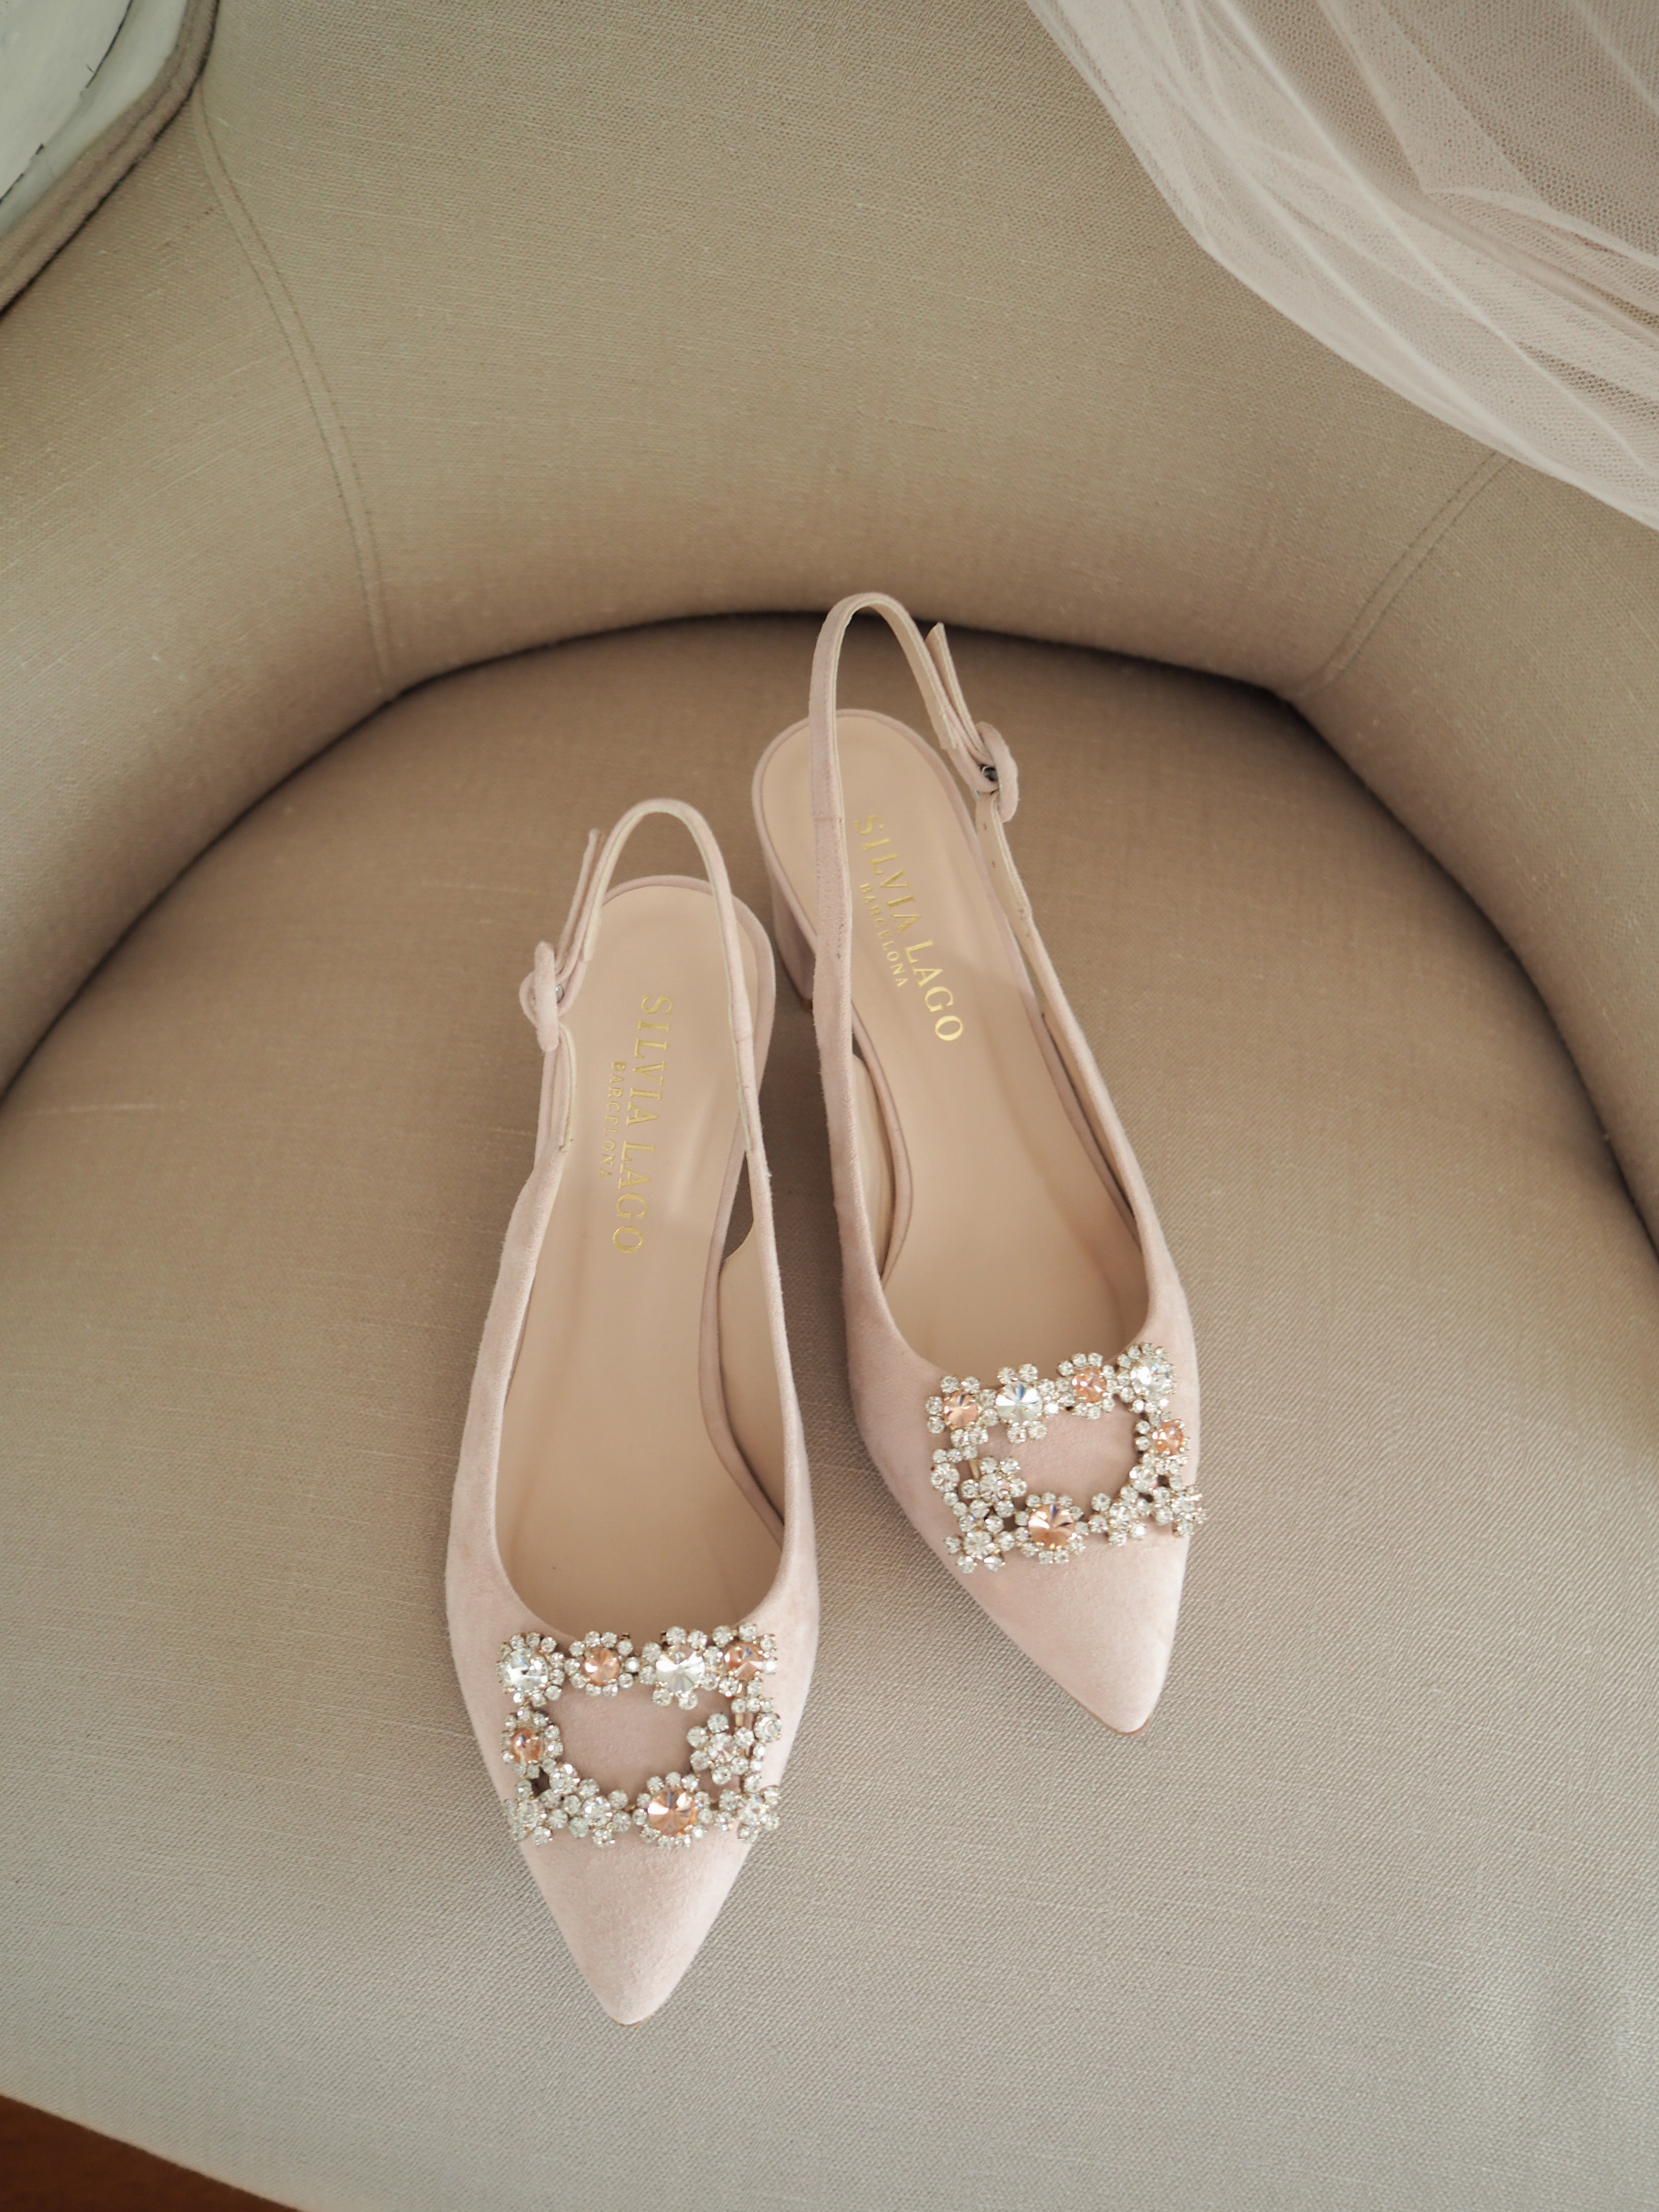 Lady Audrey 50 sling -  SILVIA LAGO | Classy shoes